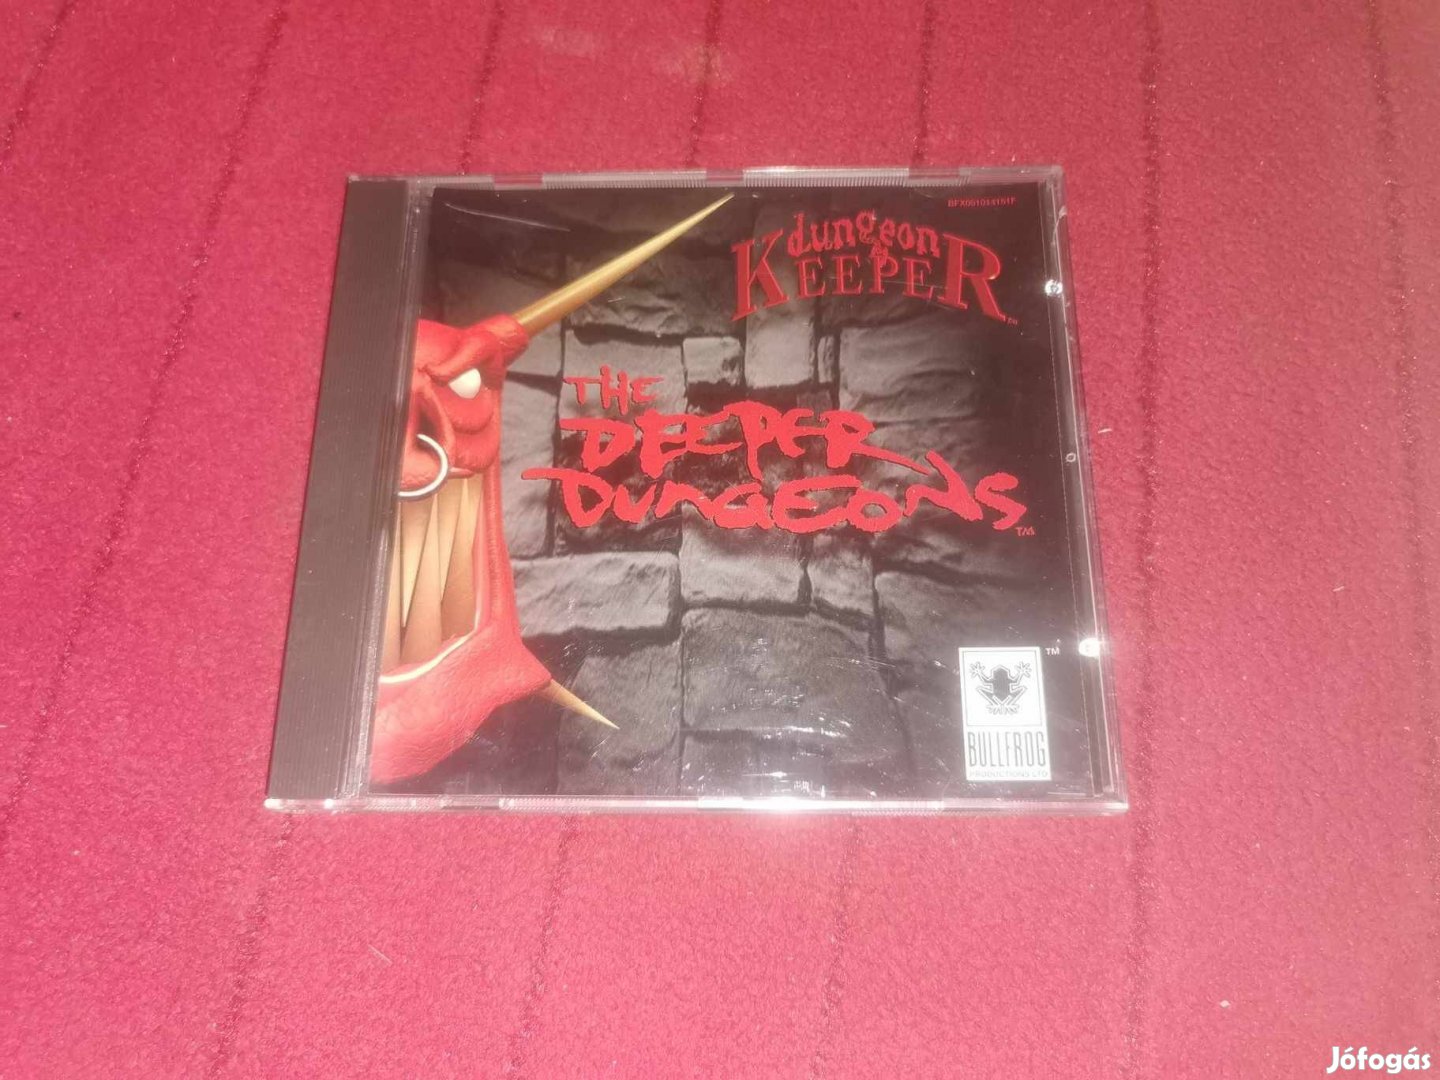 Dungeon Keeper: The Deeper Dungeons PC CD